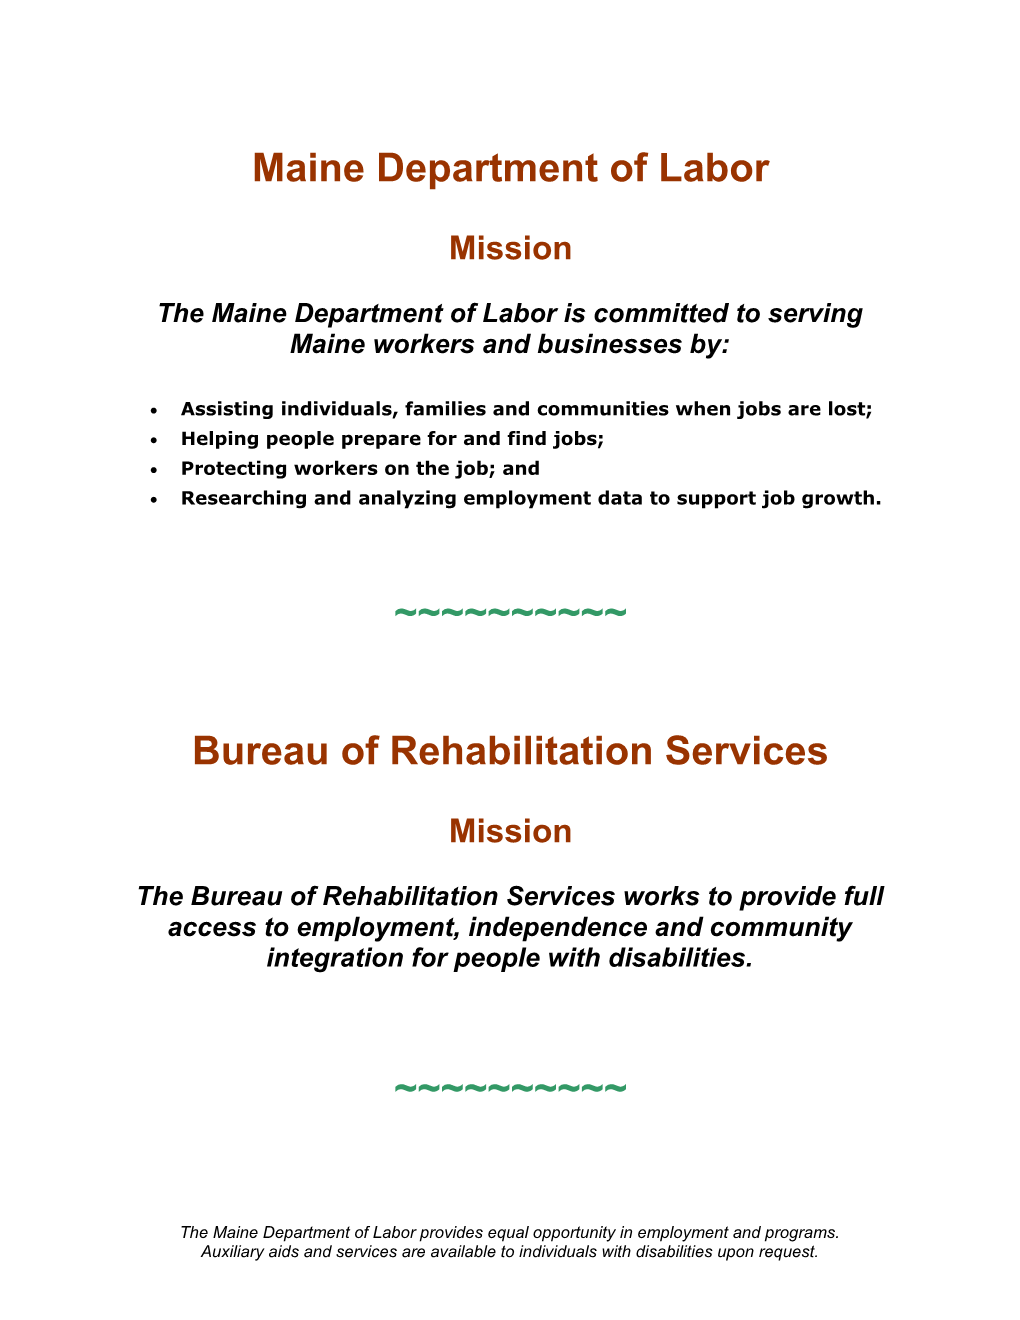 The Maine Department of Labor Provides Equal Opportunity in Employment and Programs